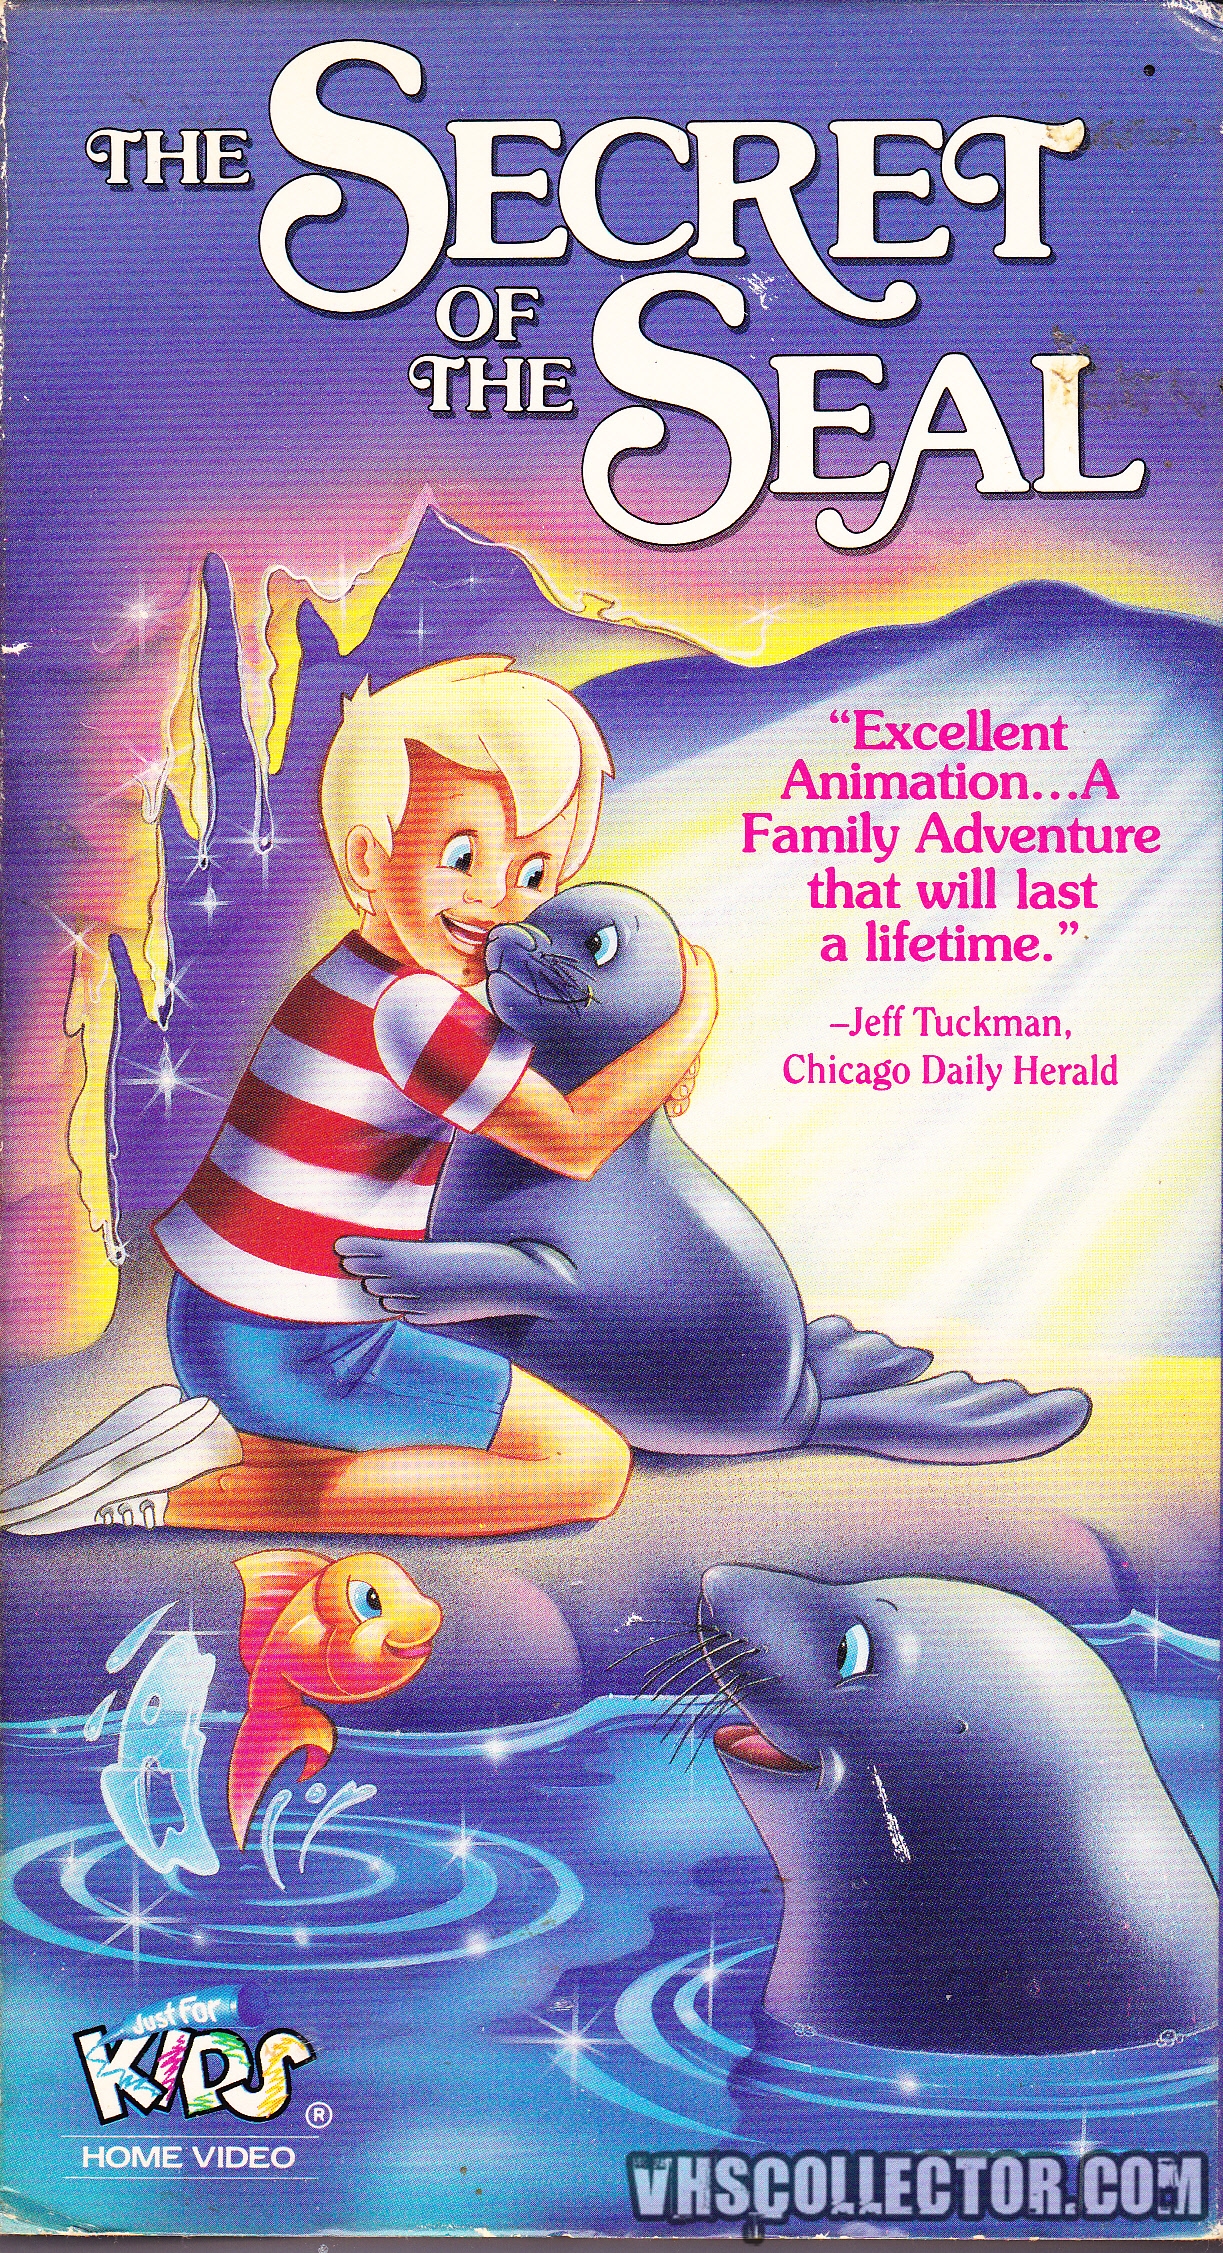 The Secret Of The Seal | VHSCollector.com